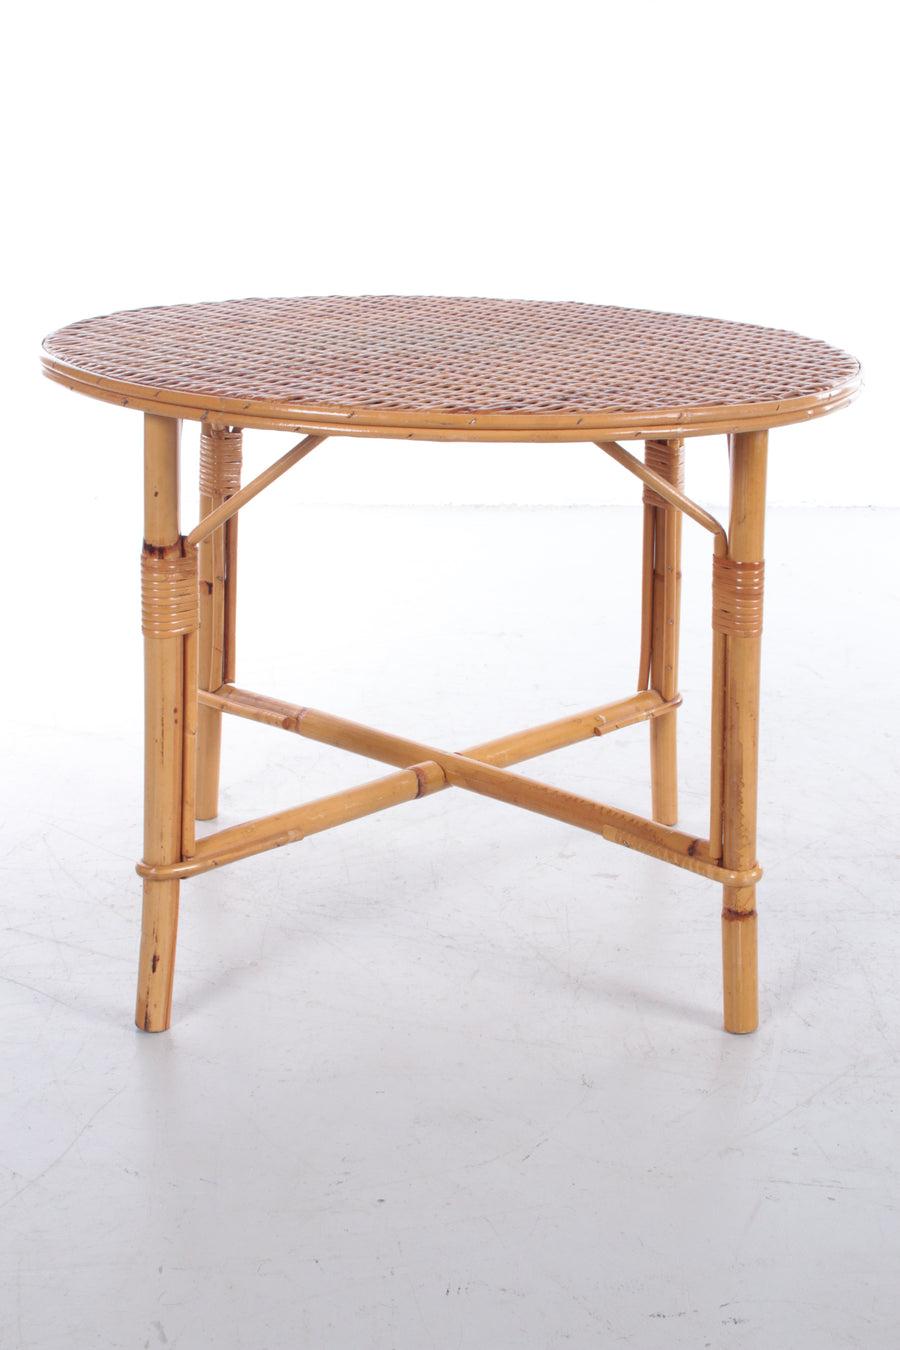 Vintage Round Coffee Table Bohemian Style, 1960

Beautiful table made of rattan and bamboo.

This is a beautiful French table that still looks fine.

Can last for years, dates from around 1960.

Fits perfectly into the Bohemian style.

Additional